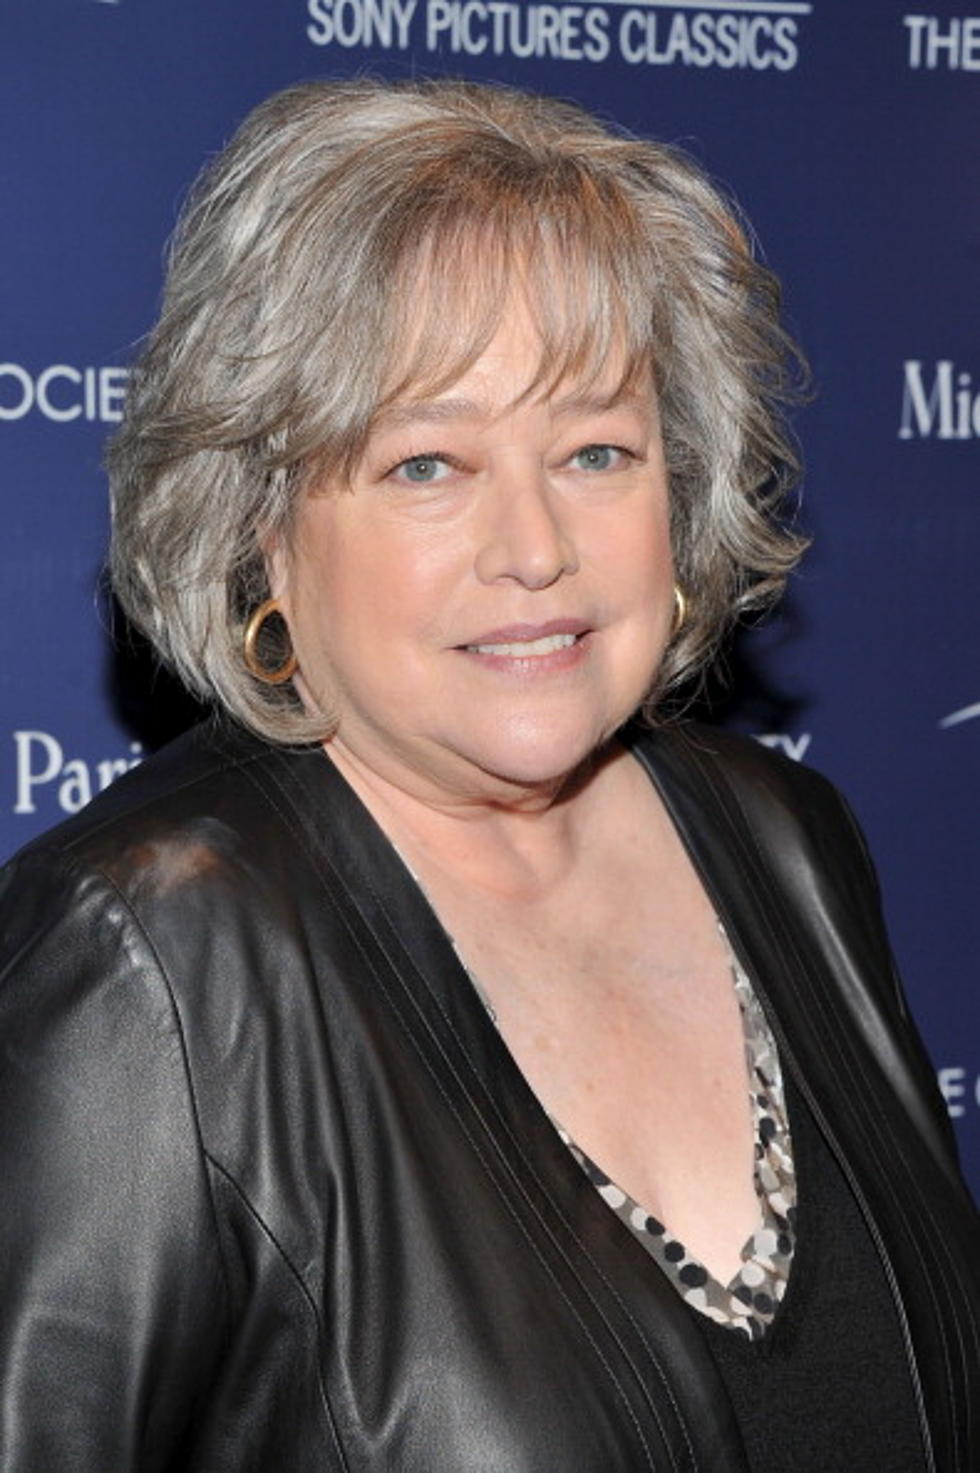 Celebrity Birthdays for Tuesday June 28 Include Kathy Bates and John Cusack